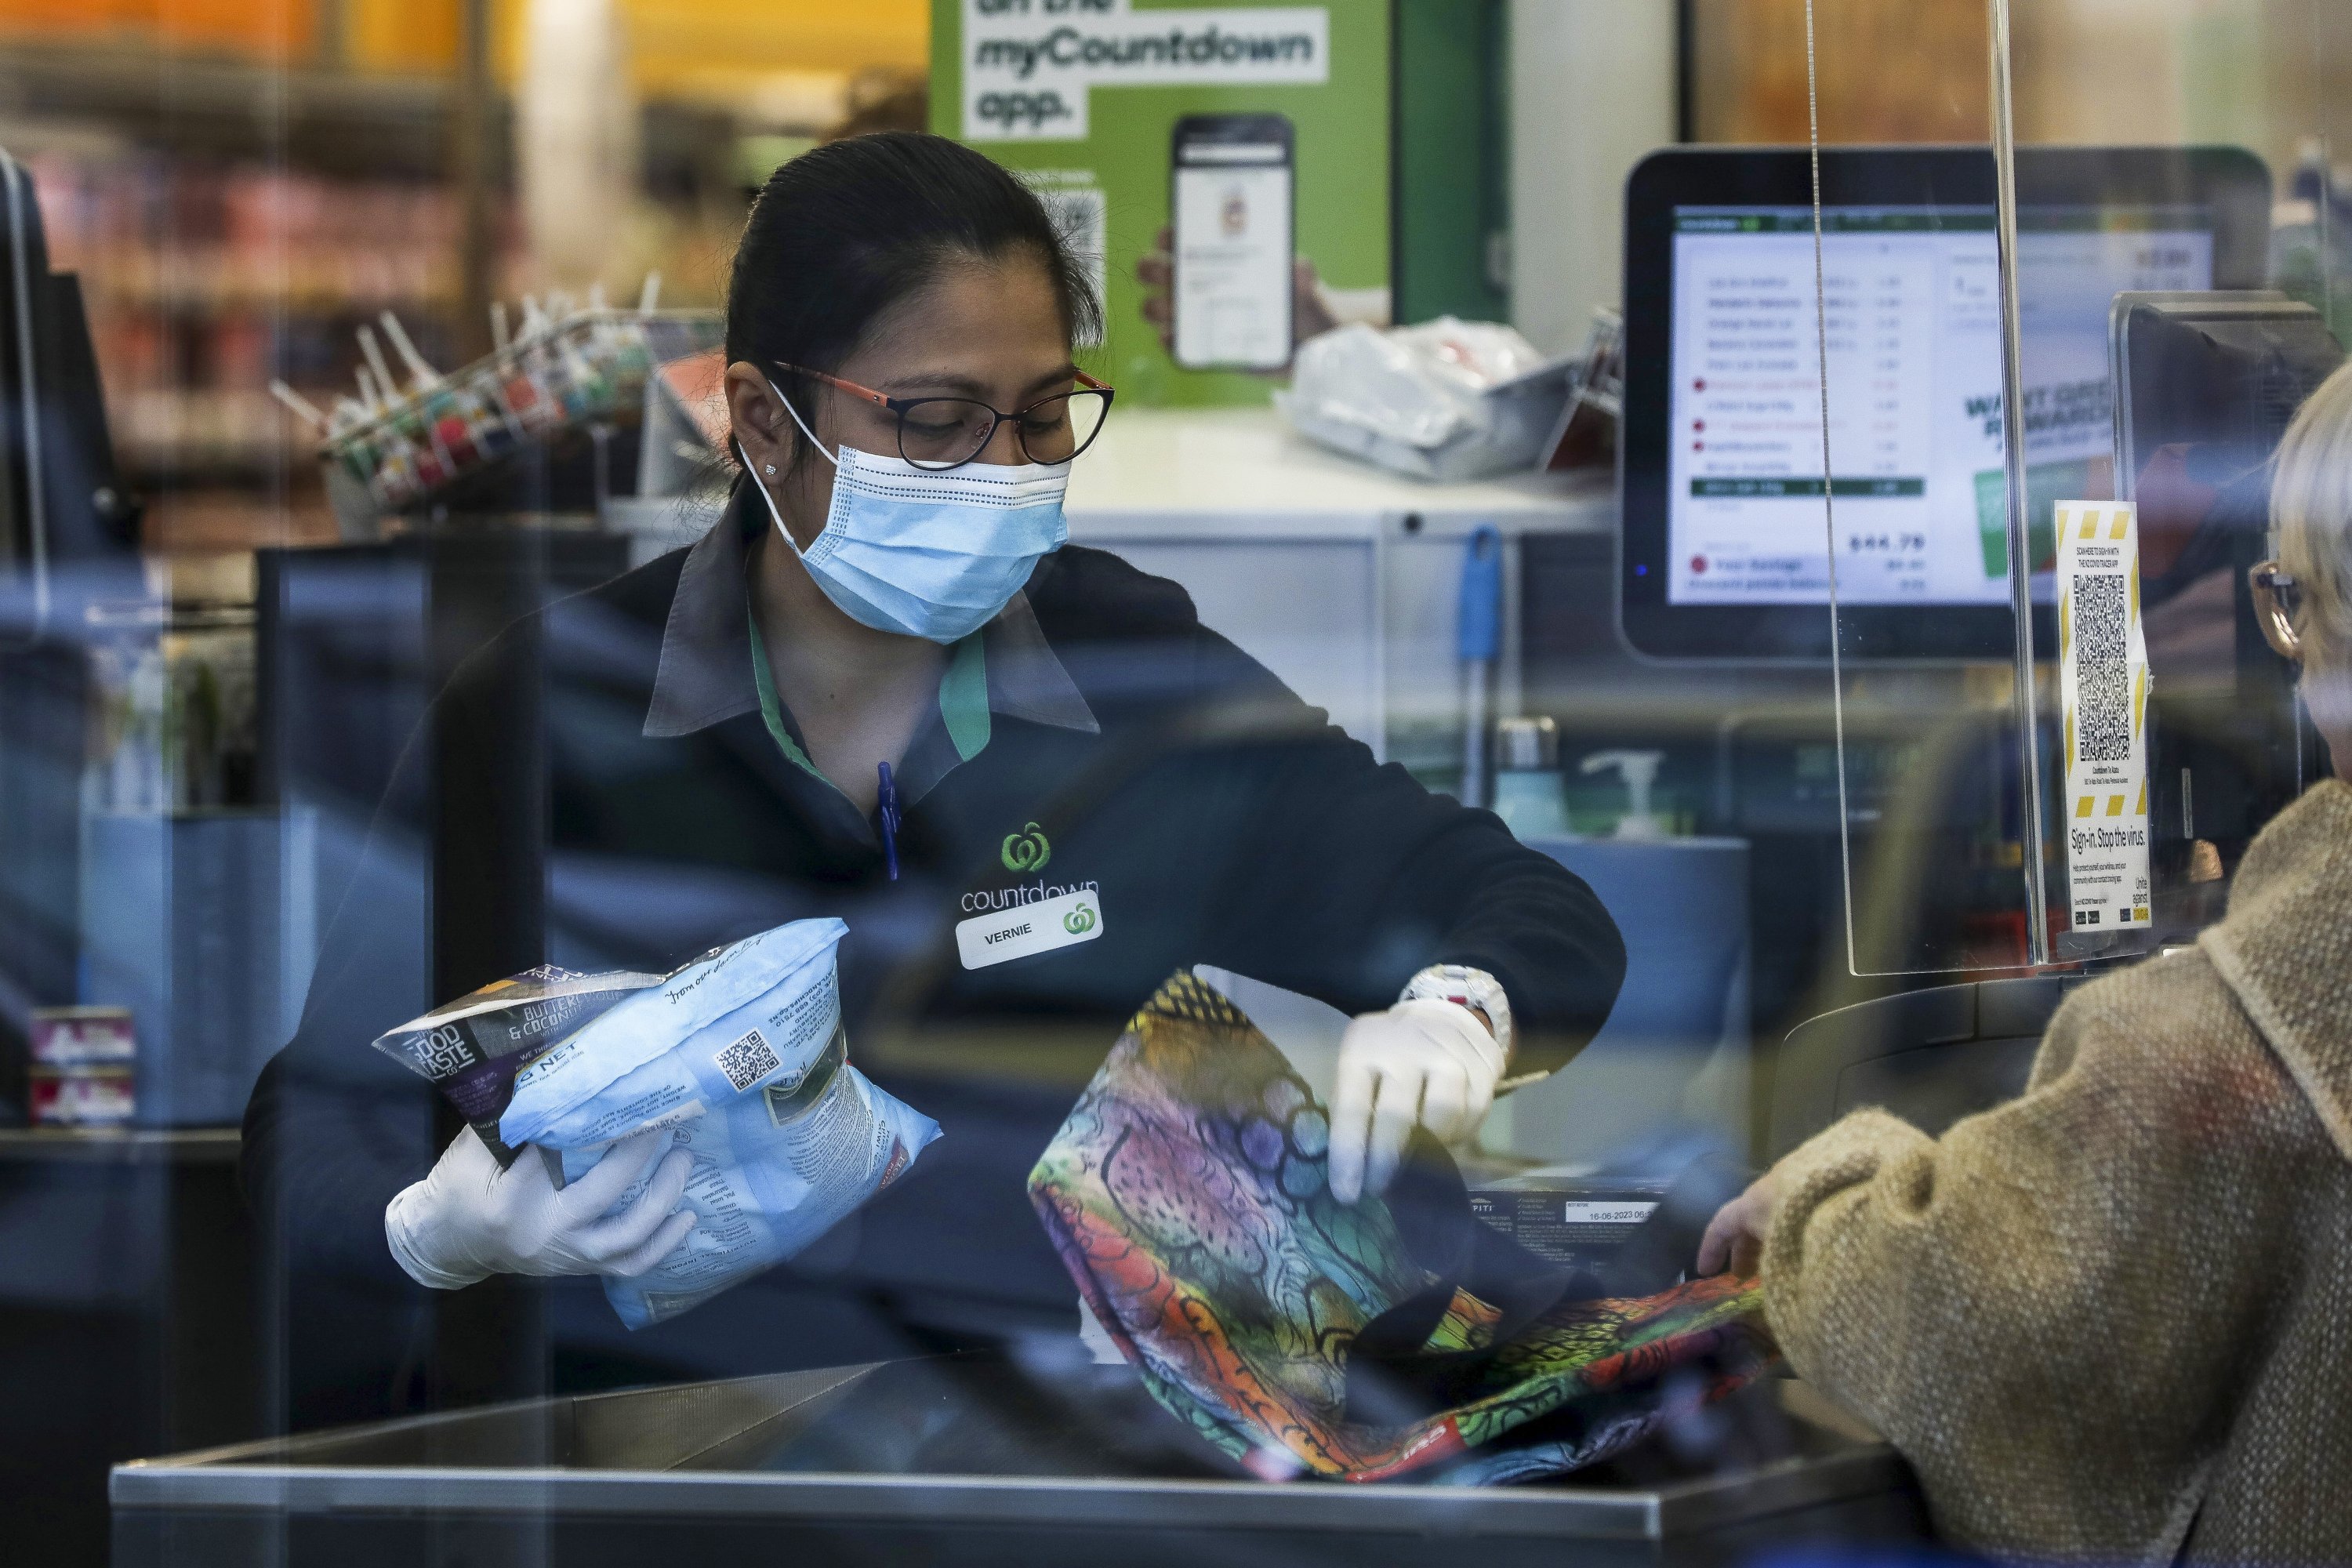 Supermarket staff help a customer with her shopping in Auckland, New Zealand, Aug. 17, 2021. (Hayden Woodward/New Zealand Herald via AP)